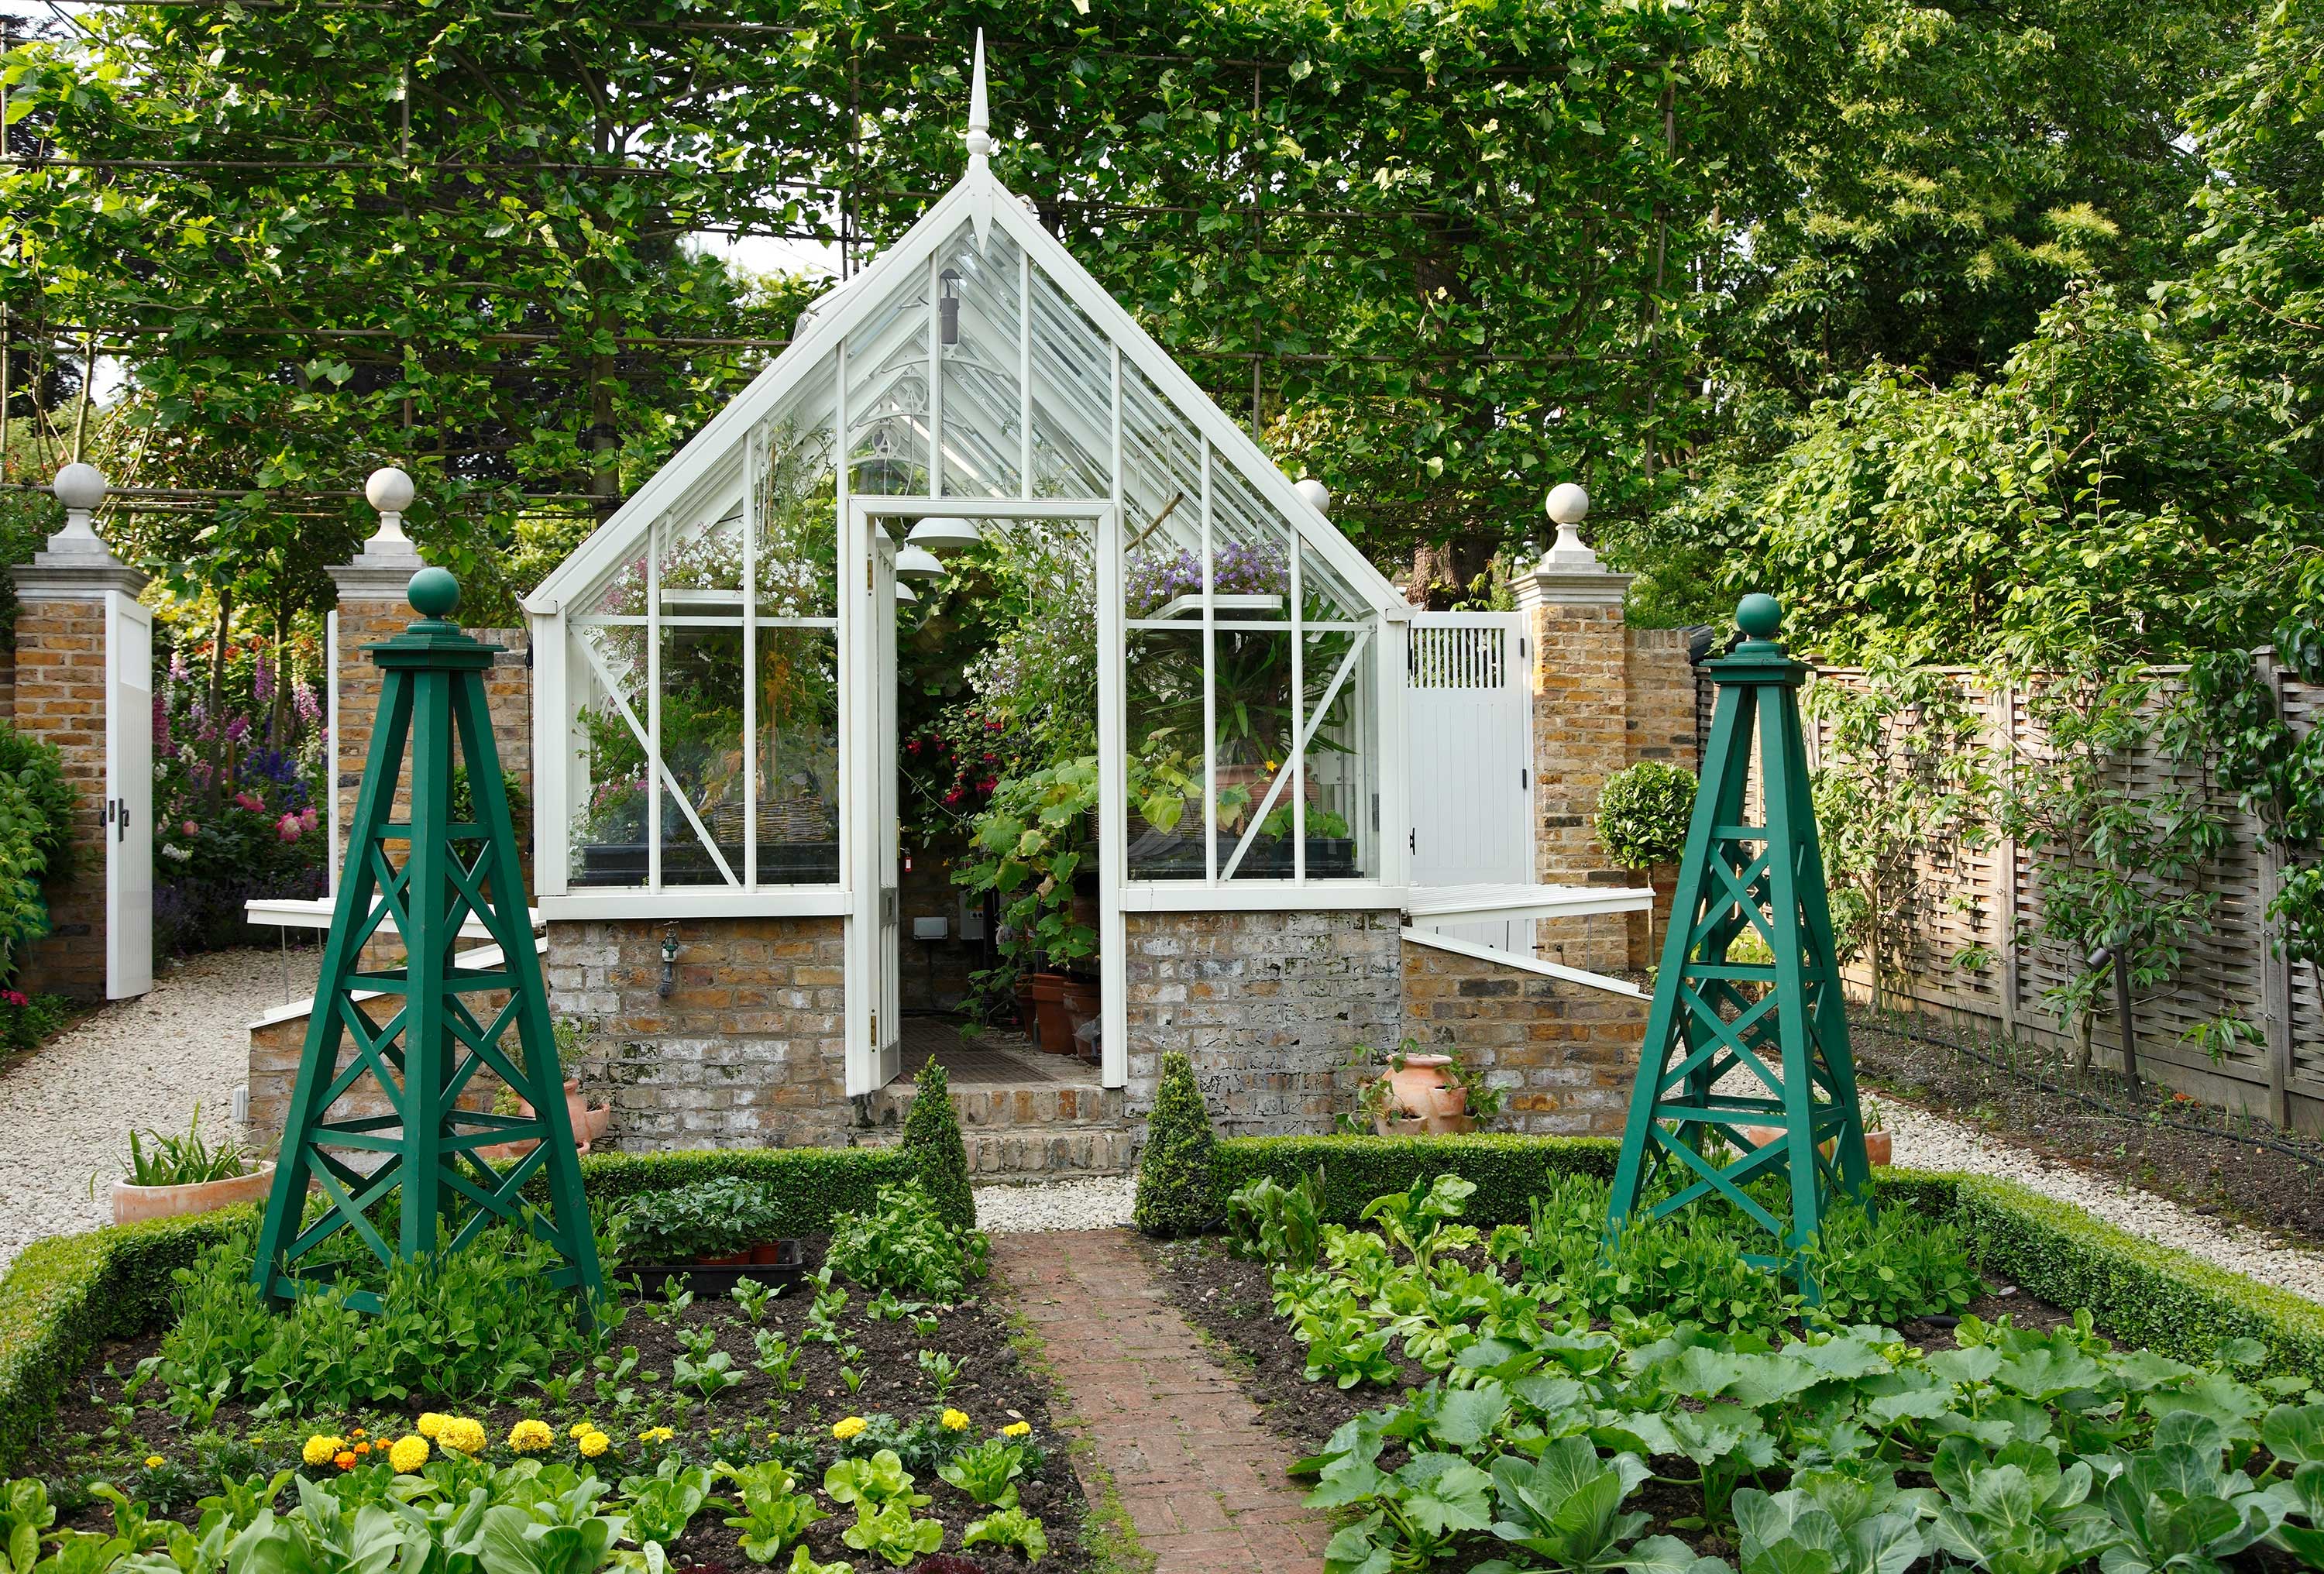 Kitchen garden ideas: 12 stylish designs for your vegetable patch